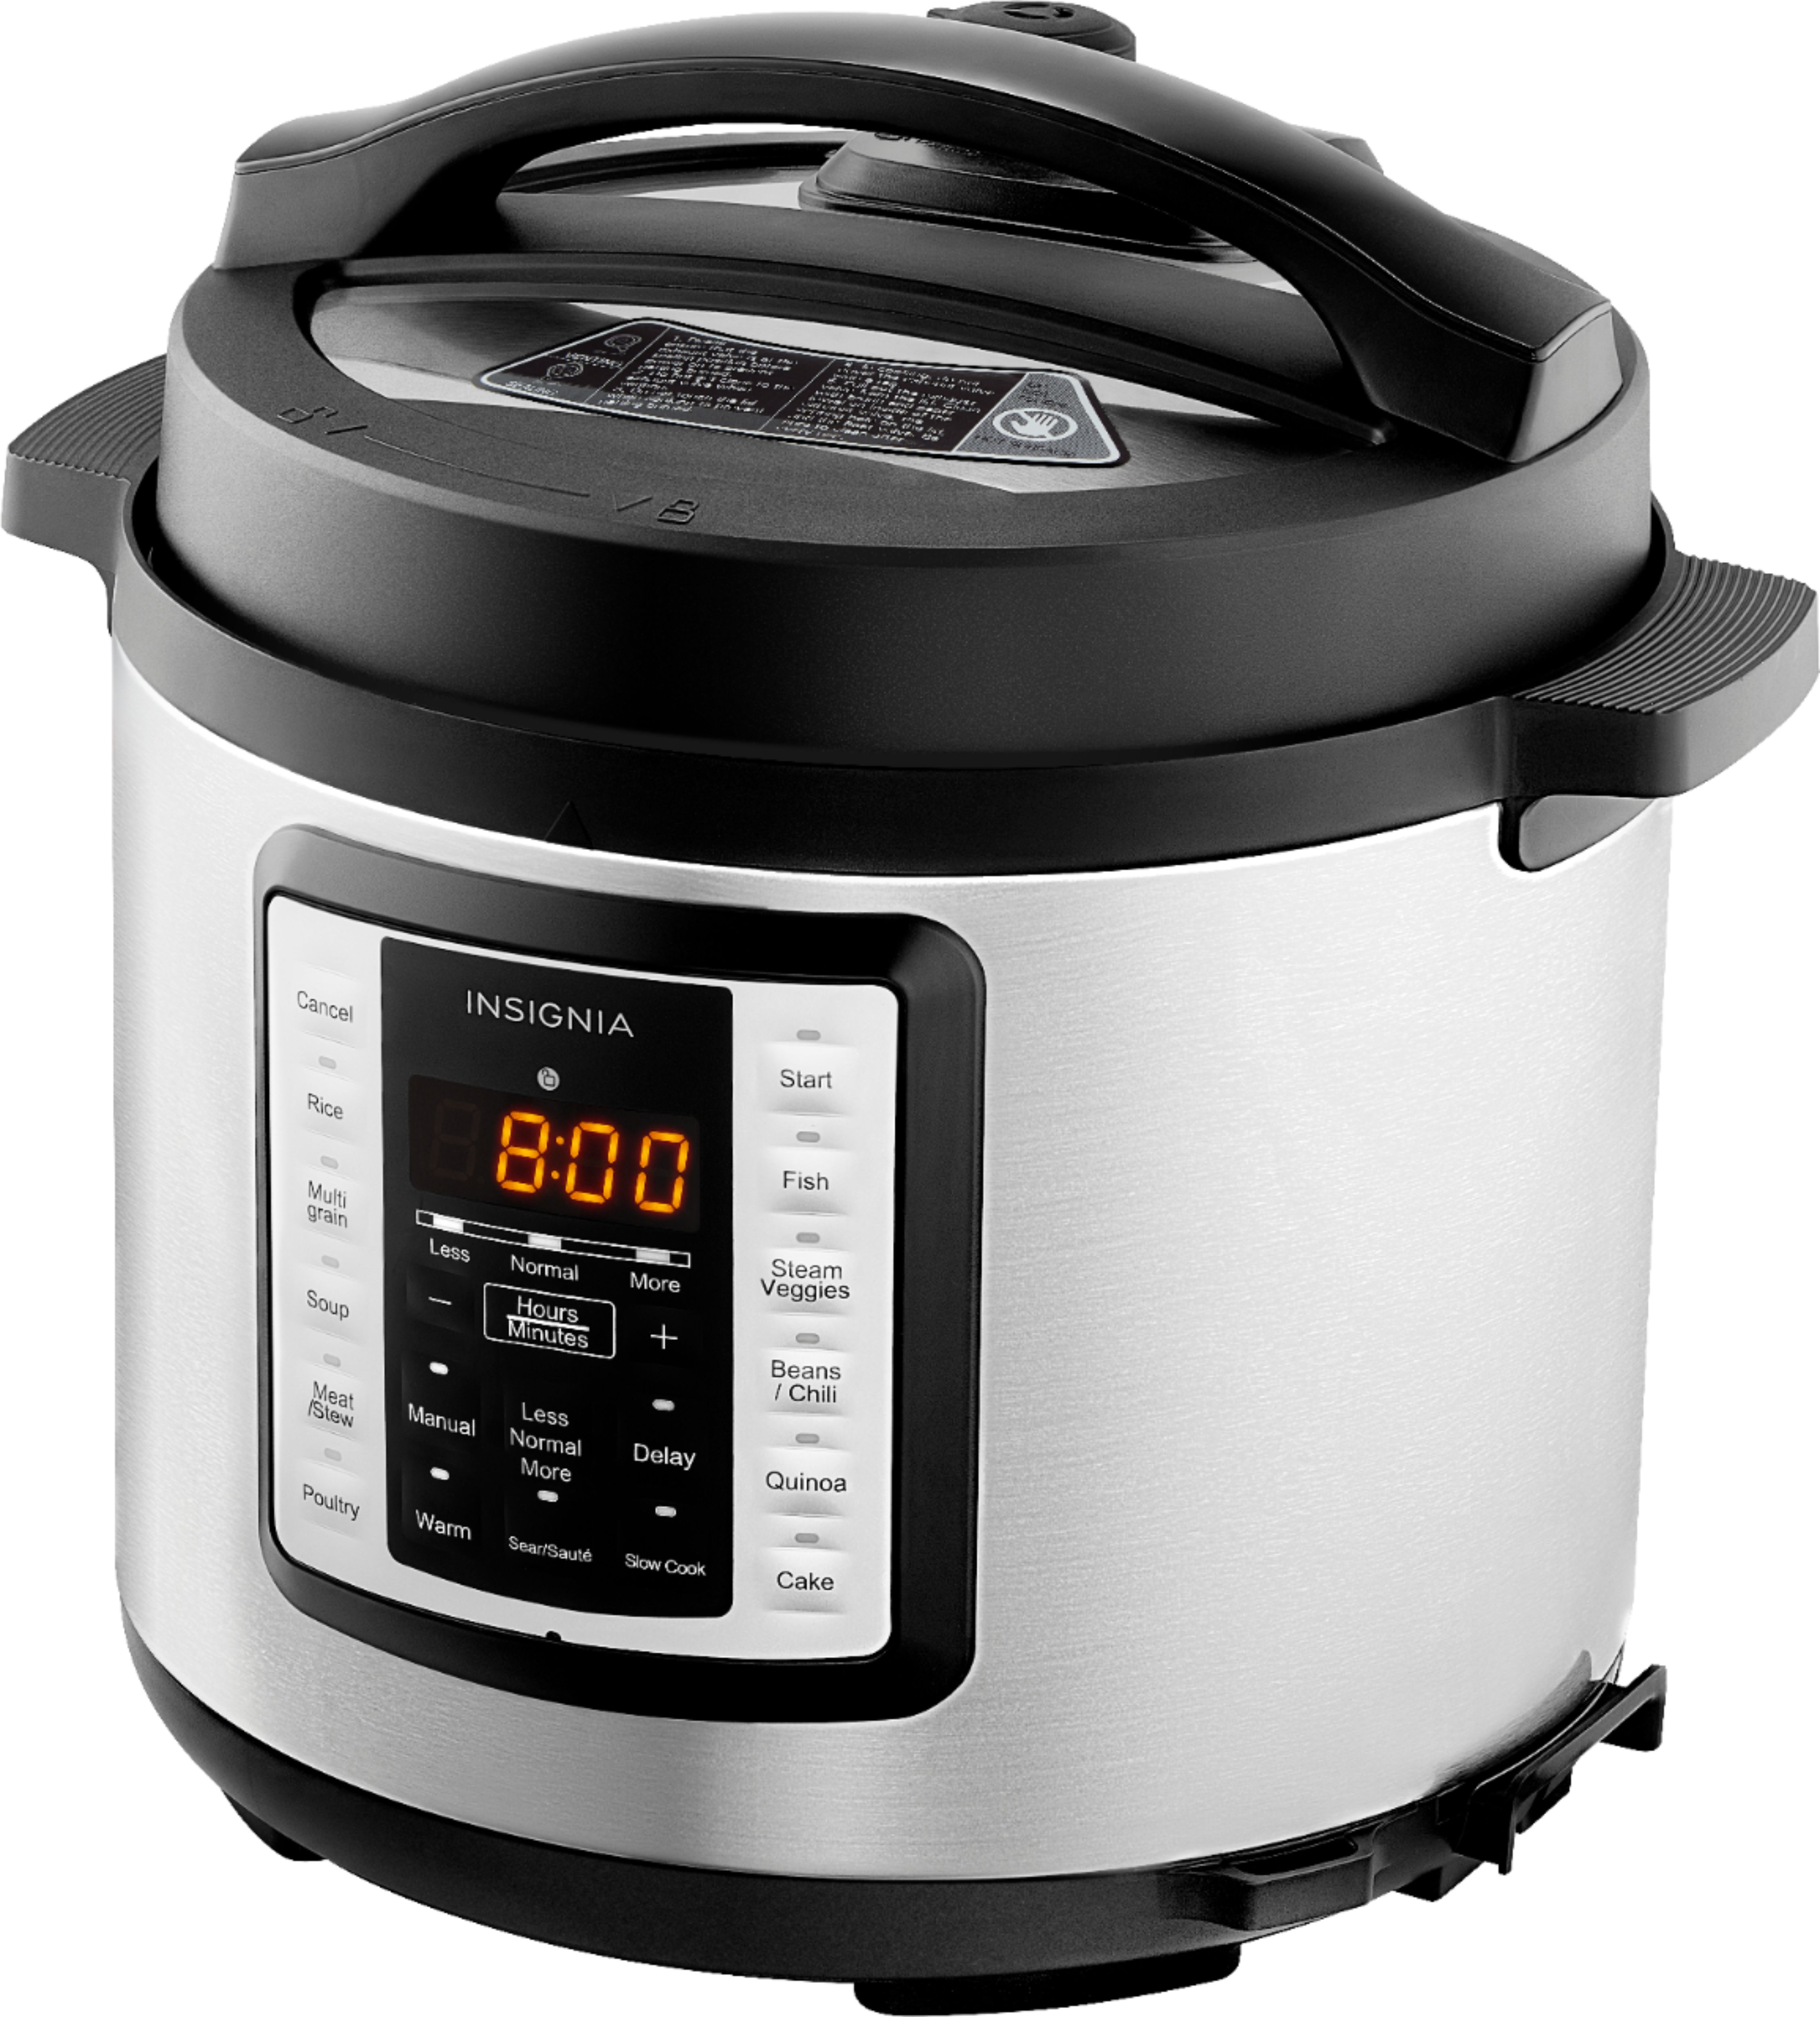 Instant pot Insignia™ - 6qt Multi-Function Pressure Cooker - Stainless Steel $29.99